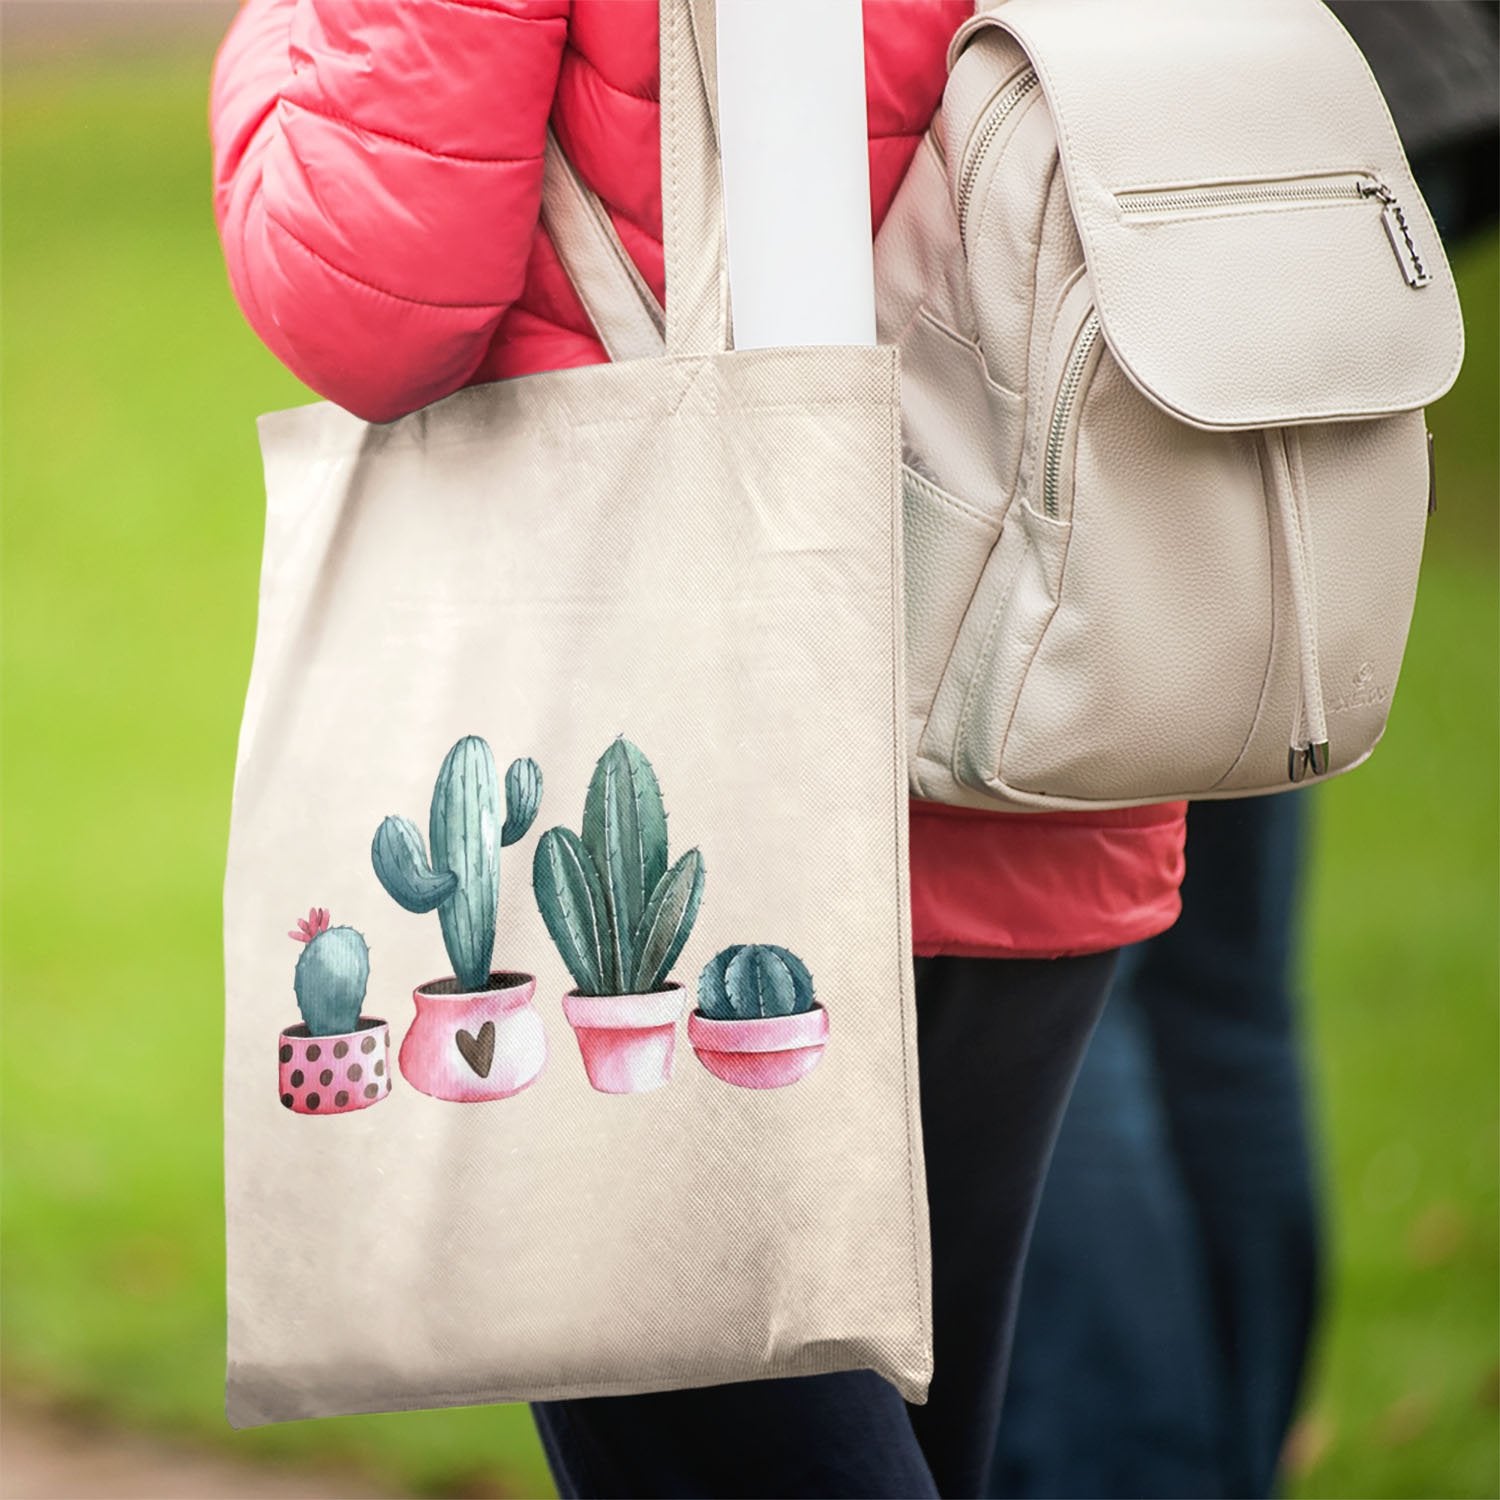 15 Pictures of Cute Tote Bags for Style Ideas | LoveToKnow